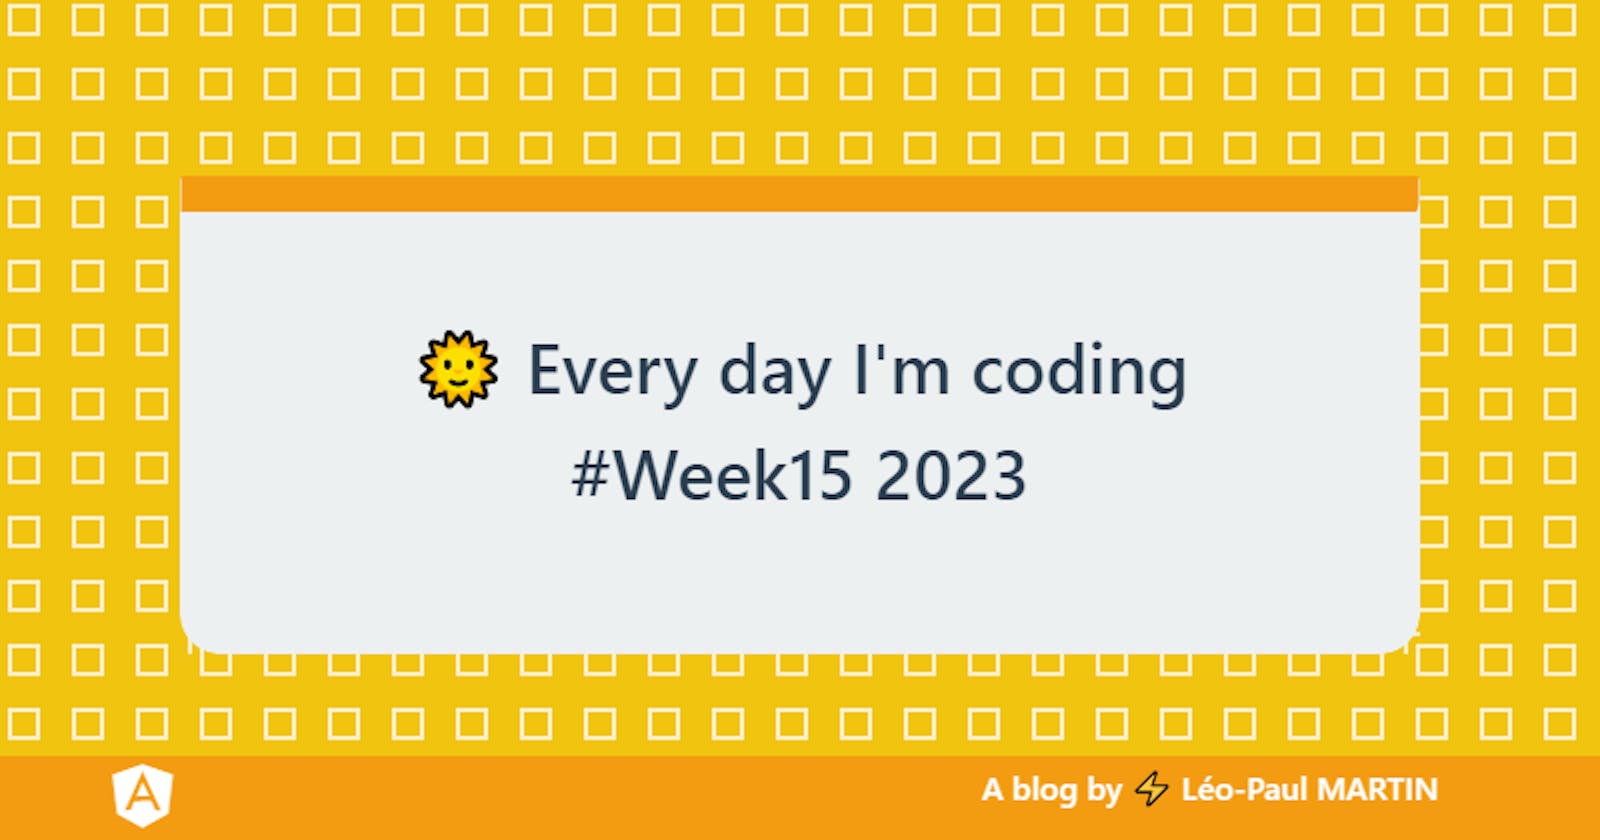 🌞 Every day I'm coding #Week15 2023